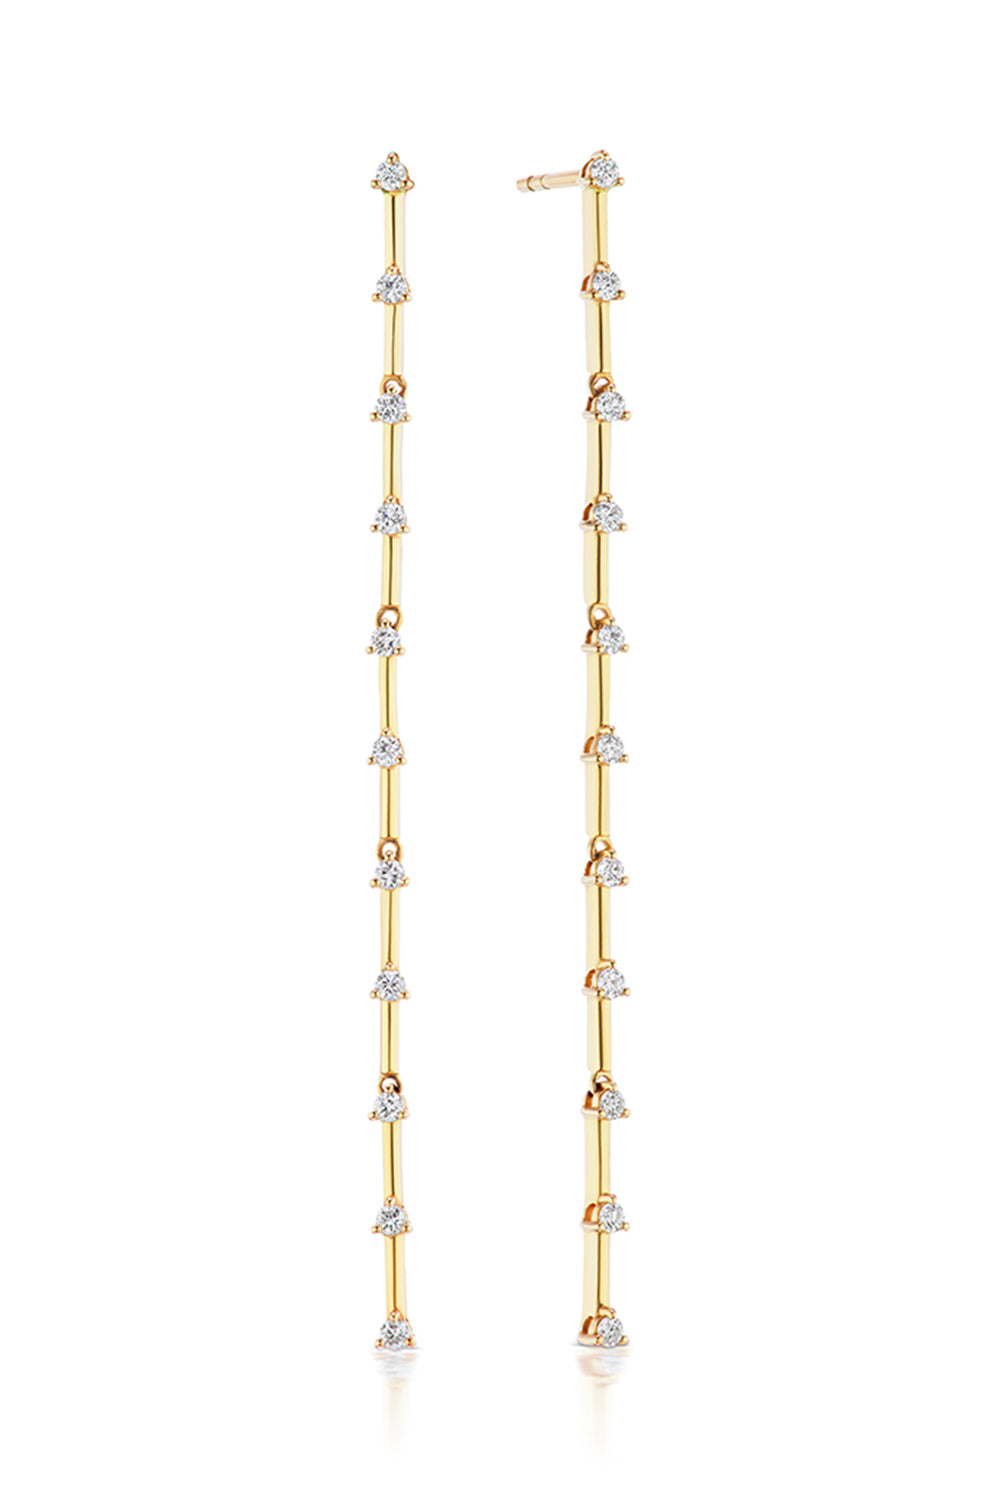 The Stand Out Earrings in Yellow Gold